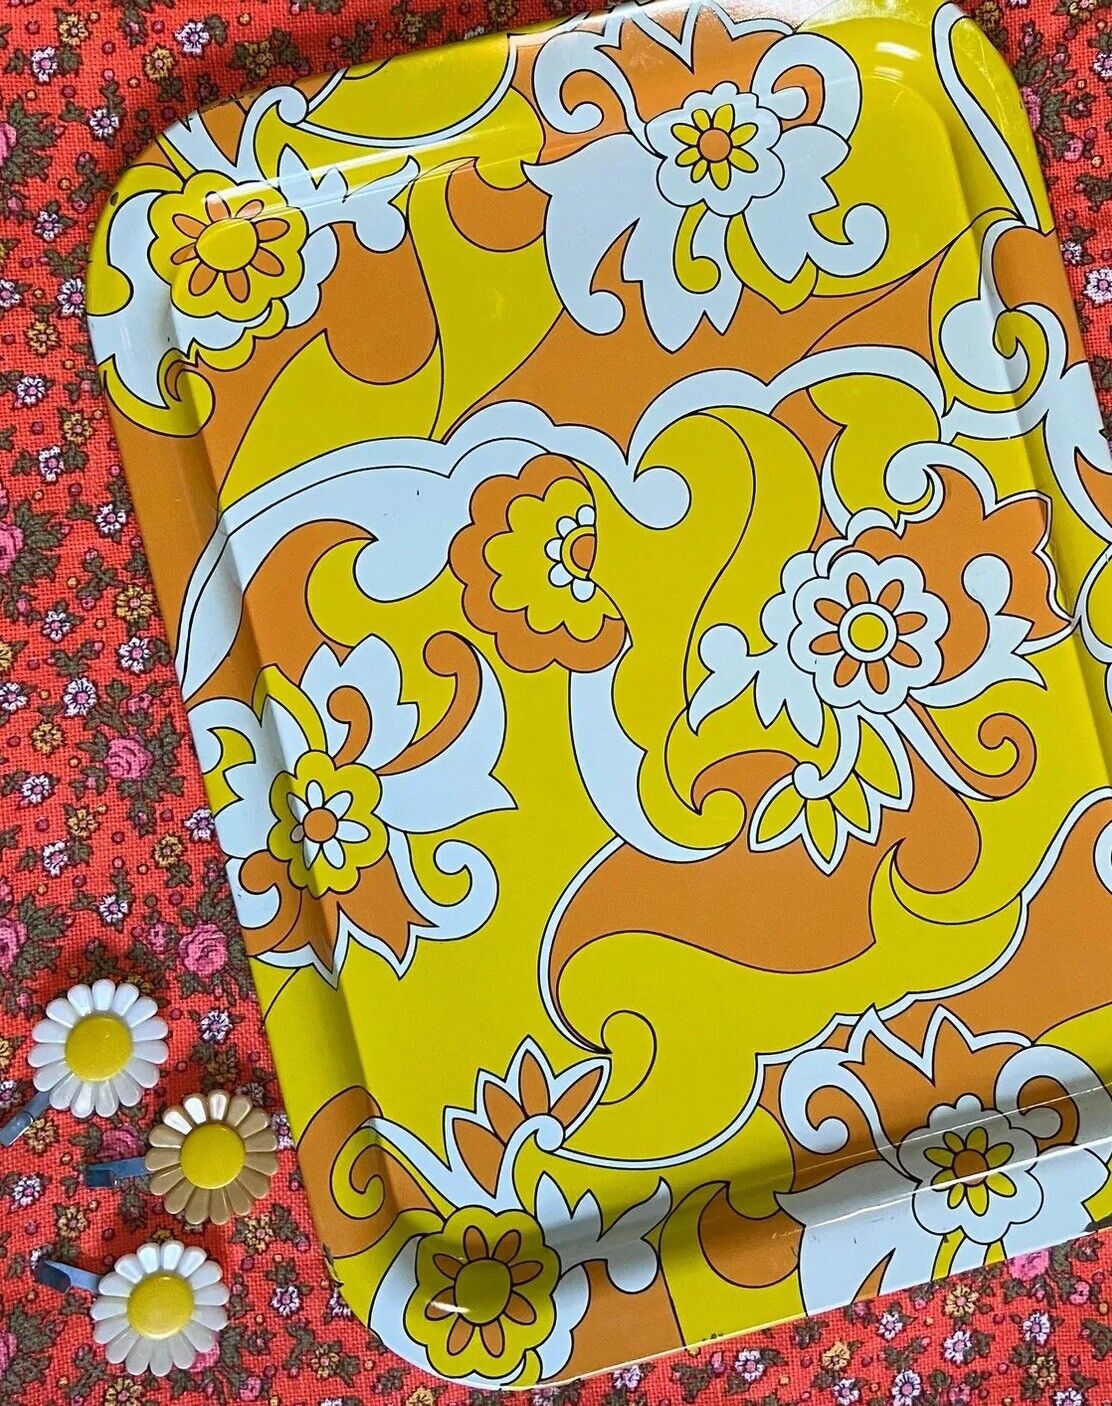 Vintage Retro 60s 70s Groovy Psychedelic Tray w/ Daisy Hanger Magnet Set MOD